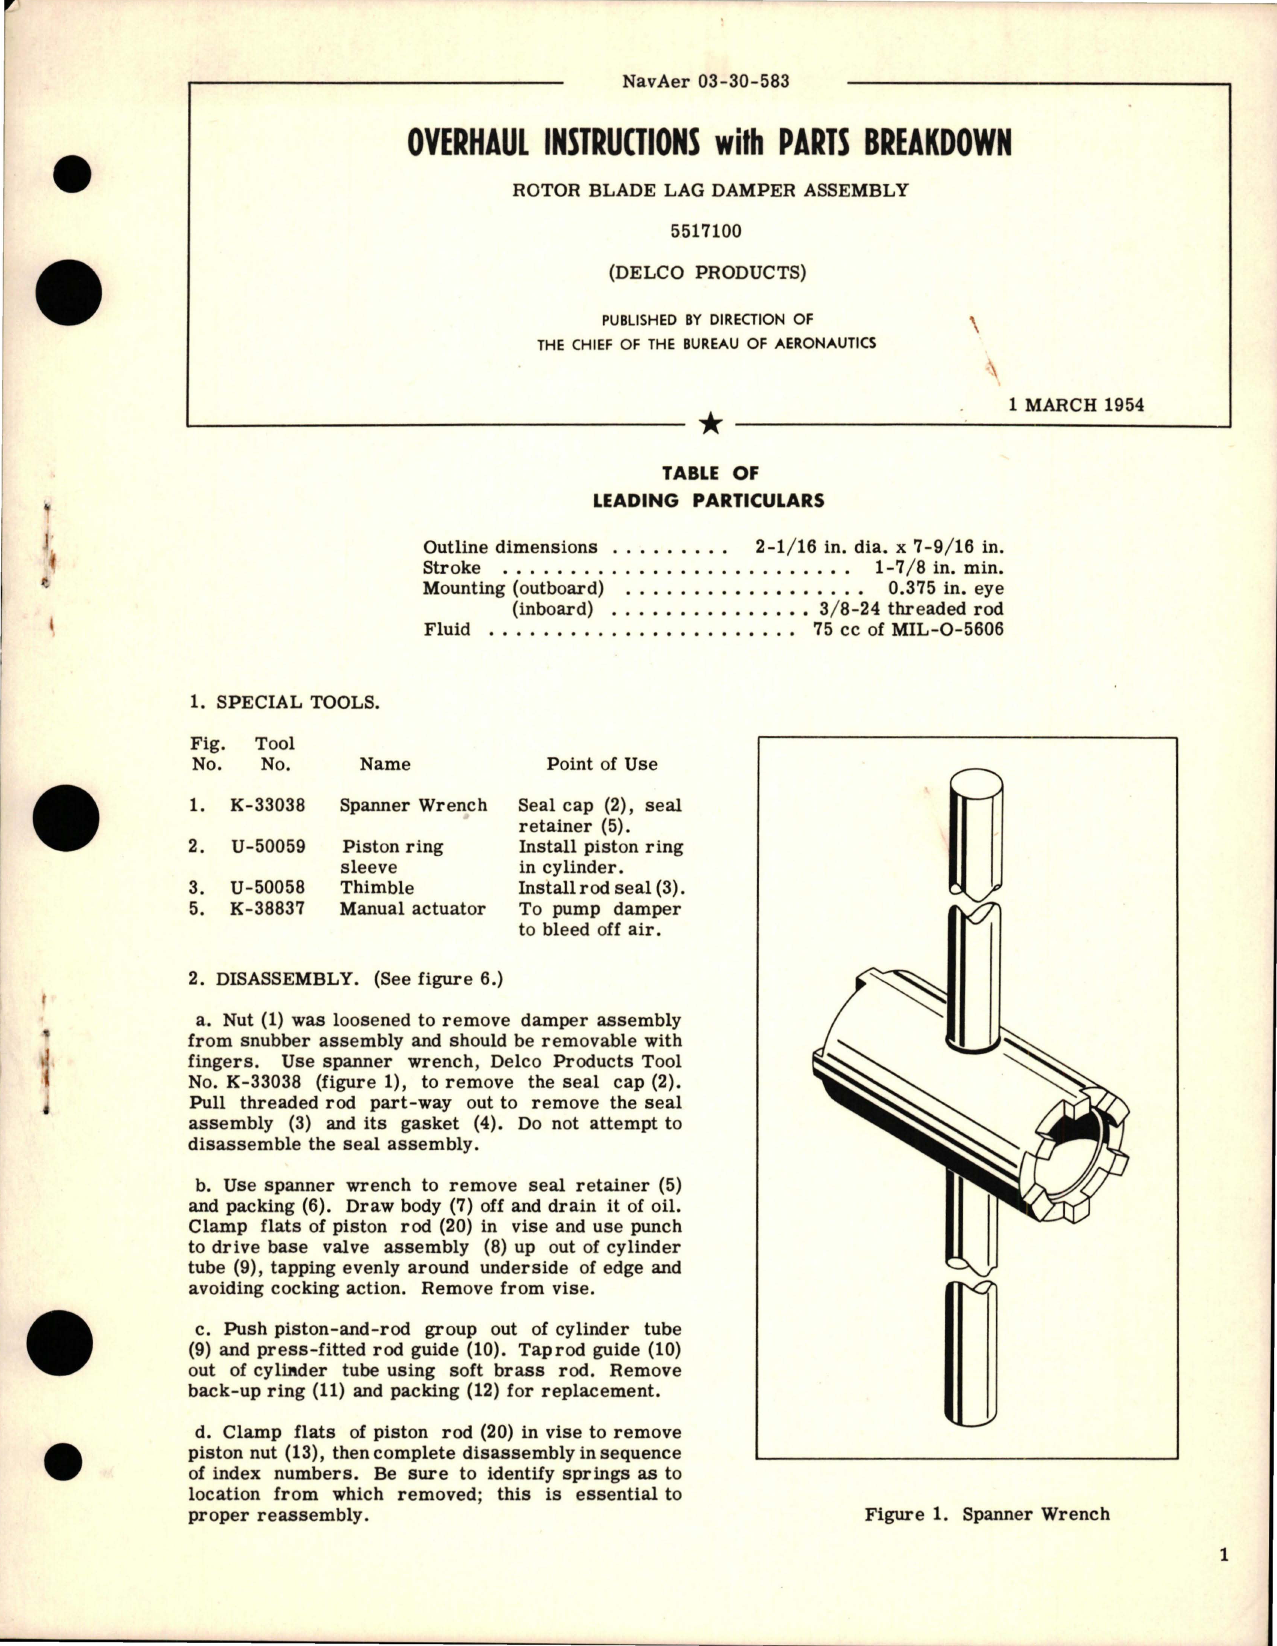 Sample page 1 from AirCorps Library document: Overhaul Instructions with Parts Breakdown for Rotor Blade Lag Damper Assembly - 5517100